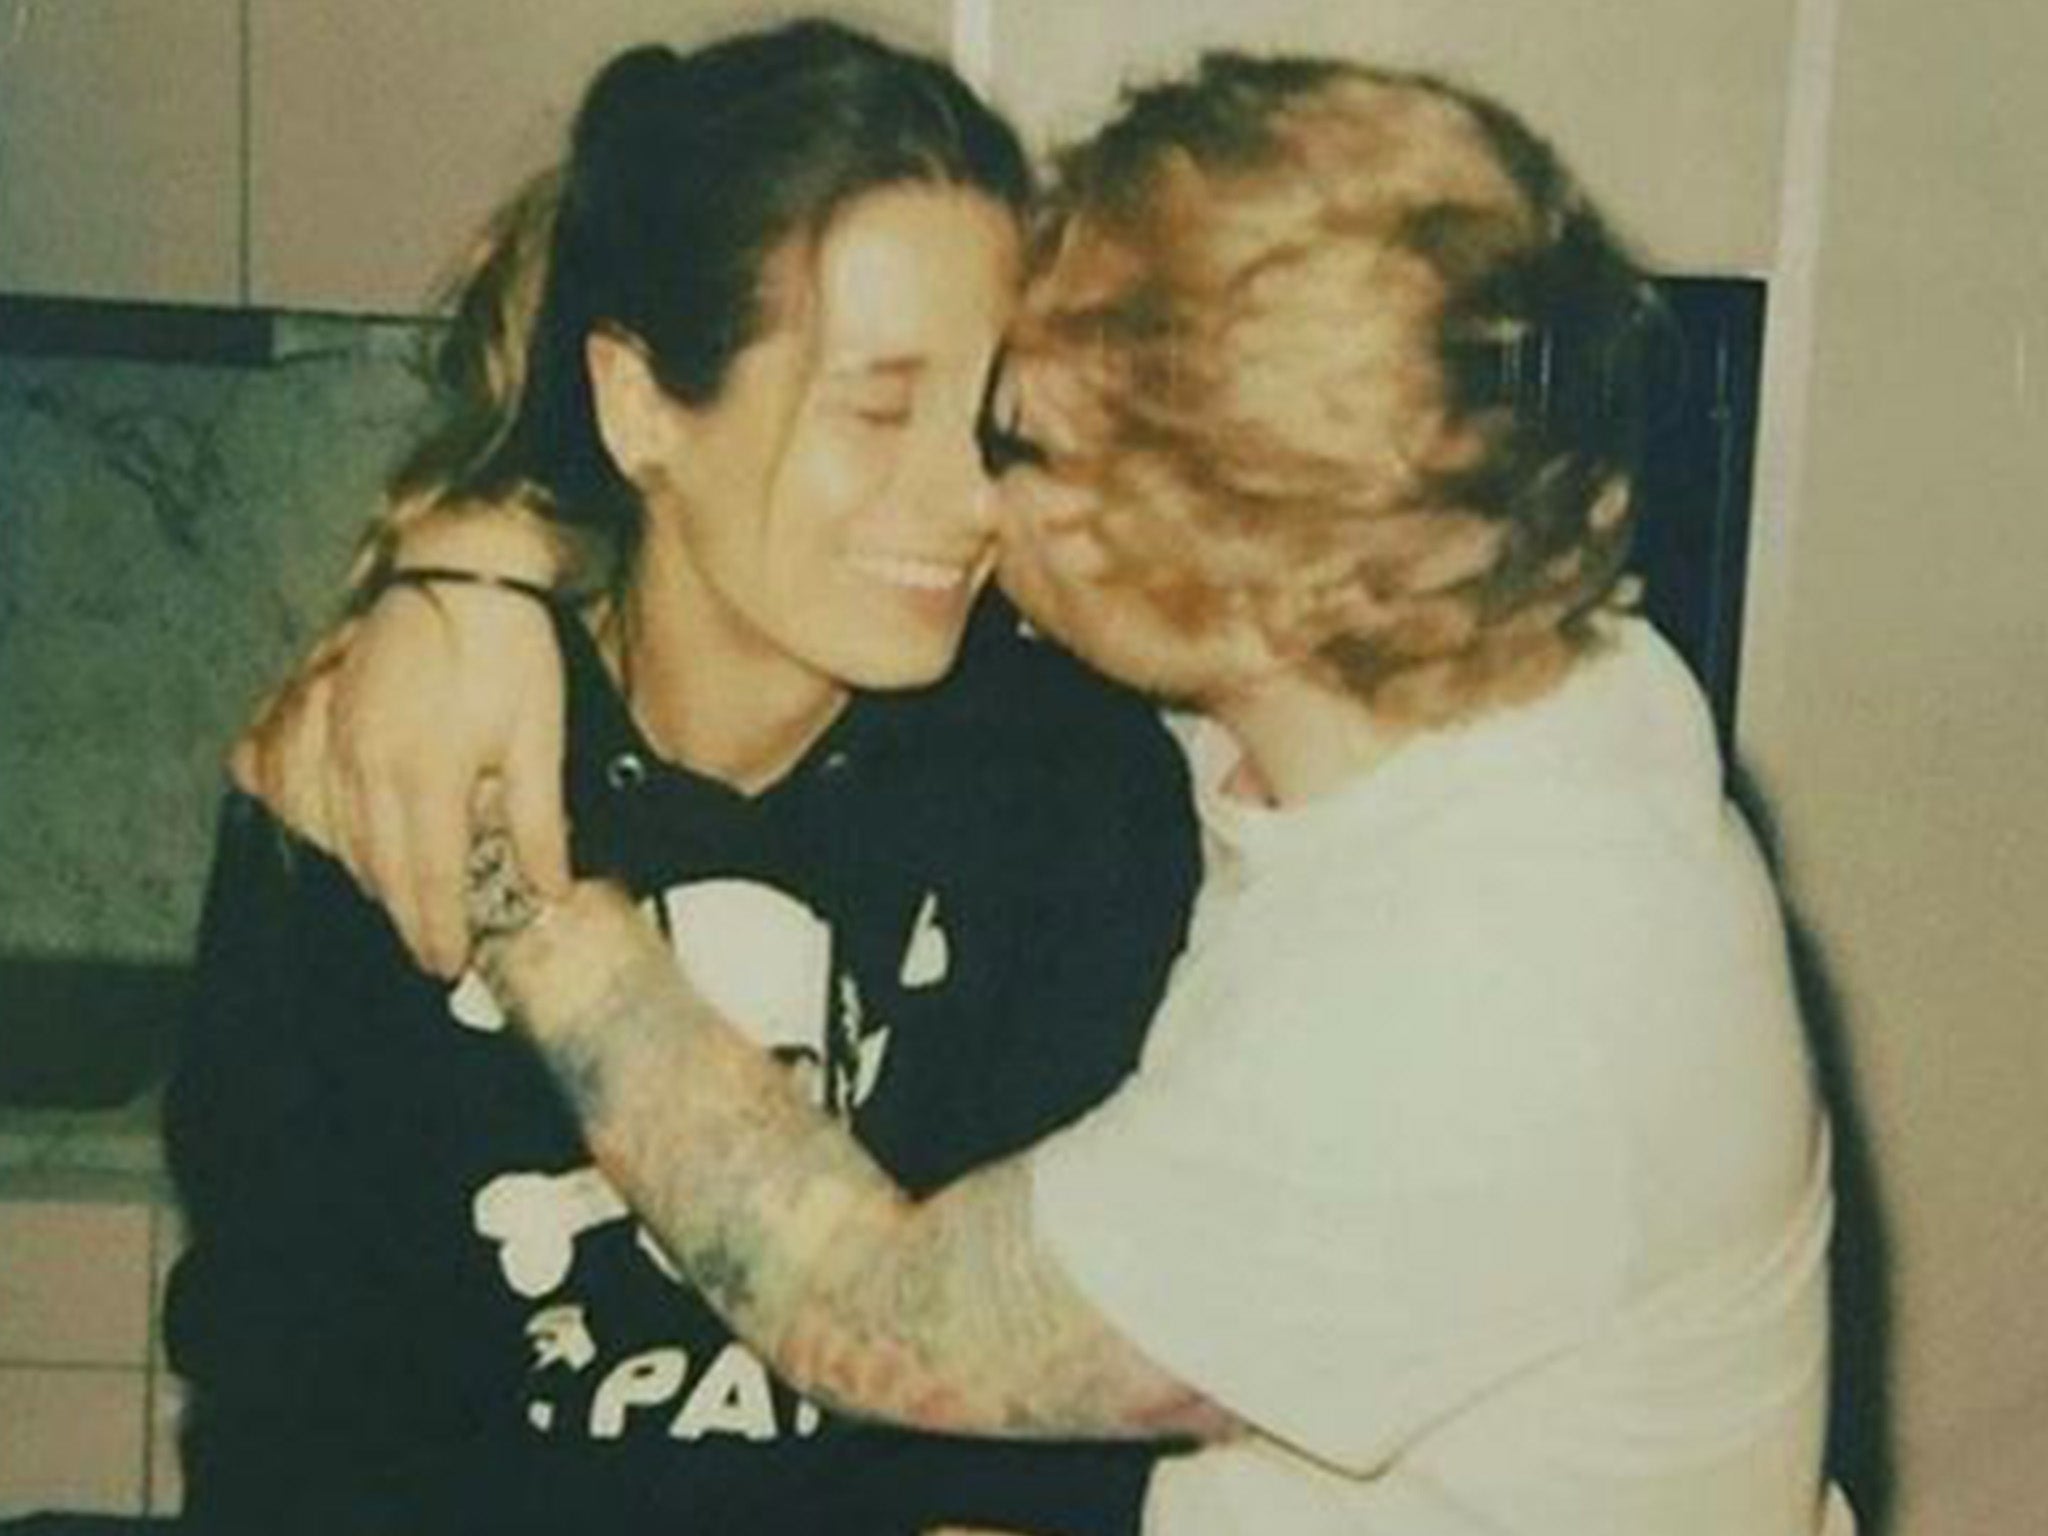 Sheeran announced his engagement to childhood sweetheart Cherry Seaborn a couple of weeks before news broke that he’d commissioned his own chapel, presumably for the wedding or a blessing